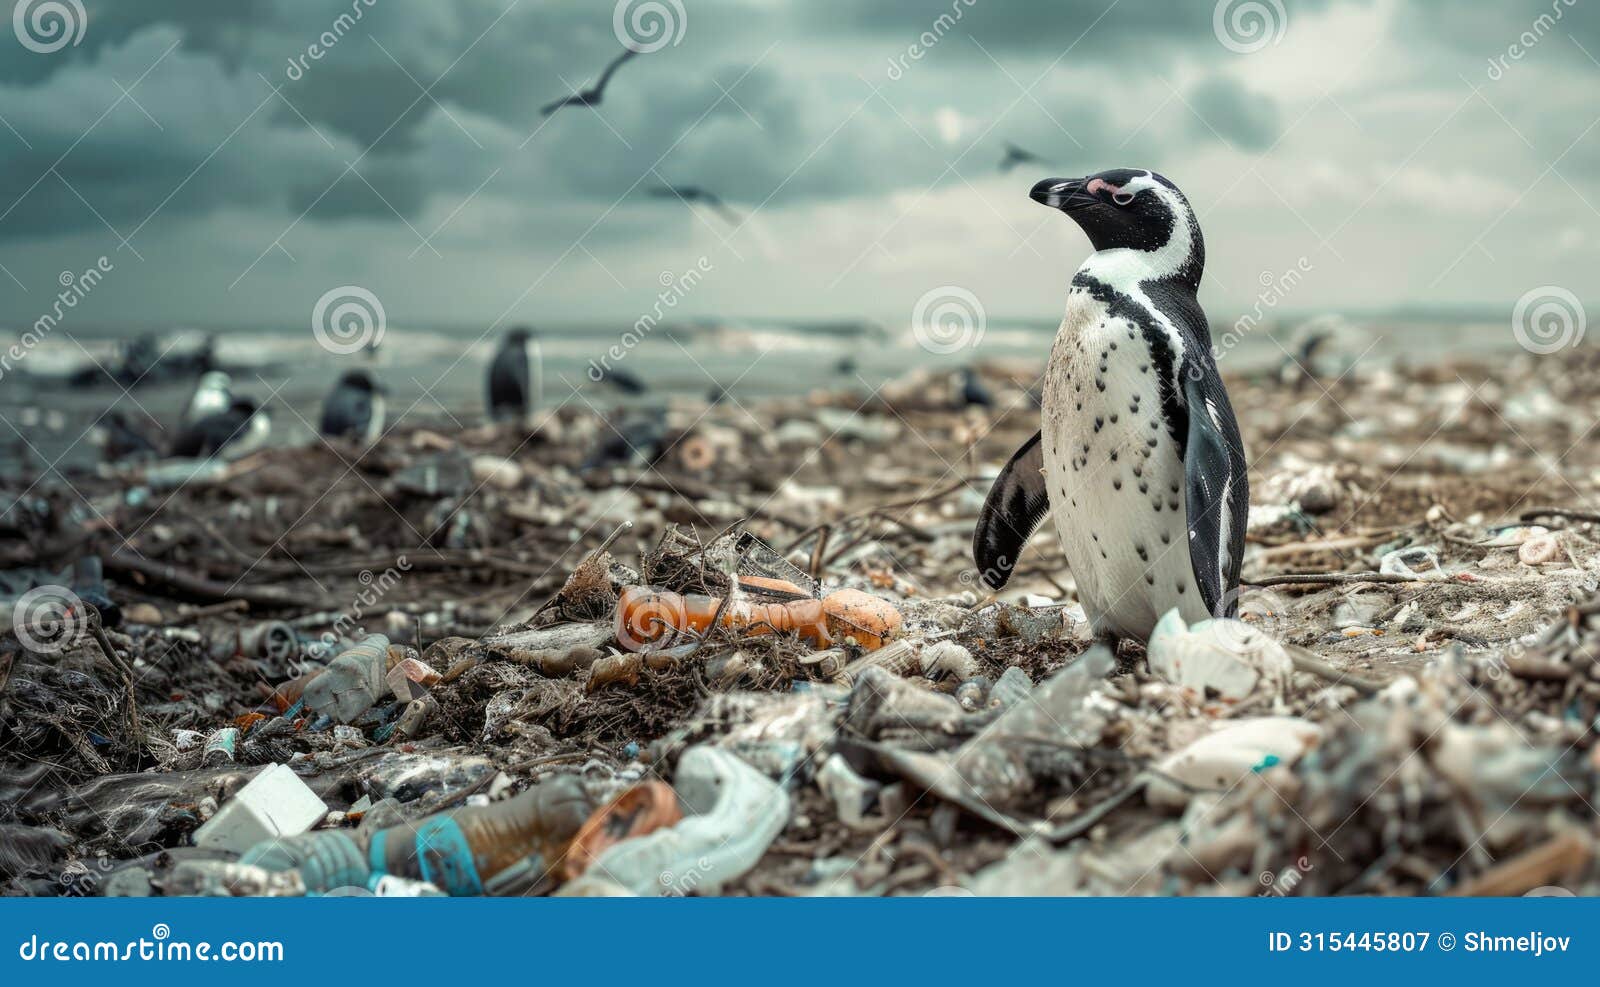 polluted world. garbage and waste. animals suffer from pollution. ecological disaster concept. ai-generated.